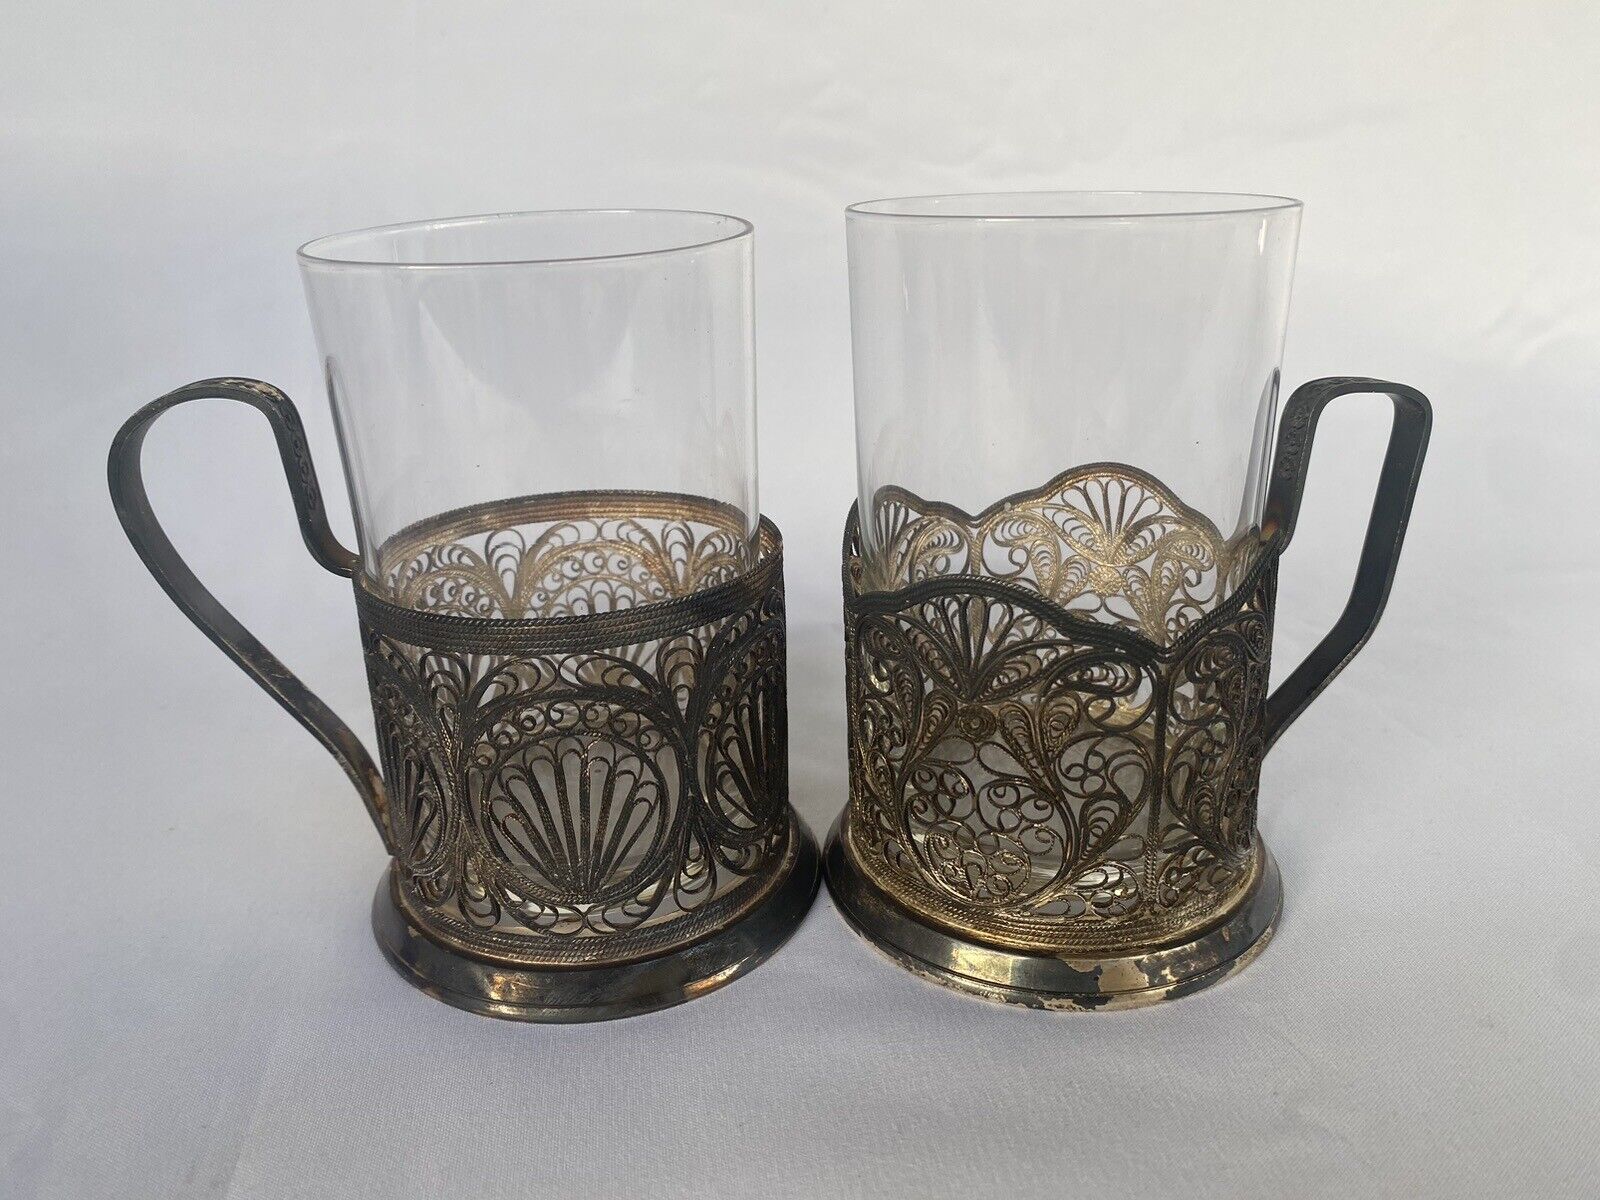 PODSTAKANNIK silvered Color filigree PEACOCK TAIL Tea Glass Cup holders Lot Of 2